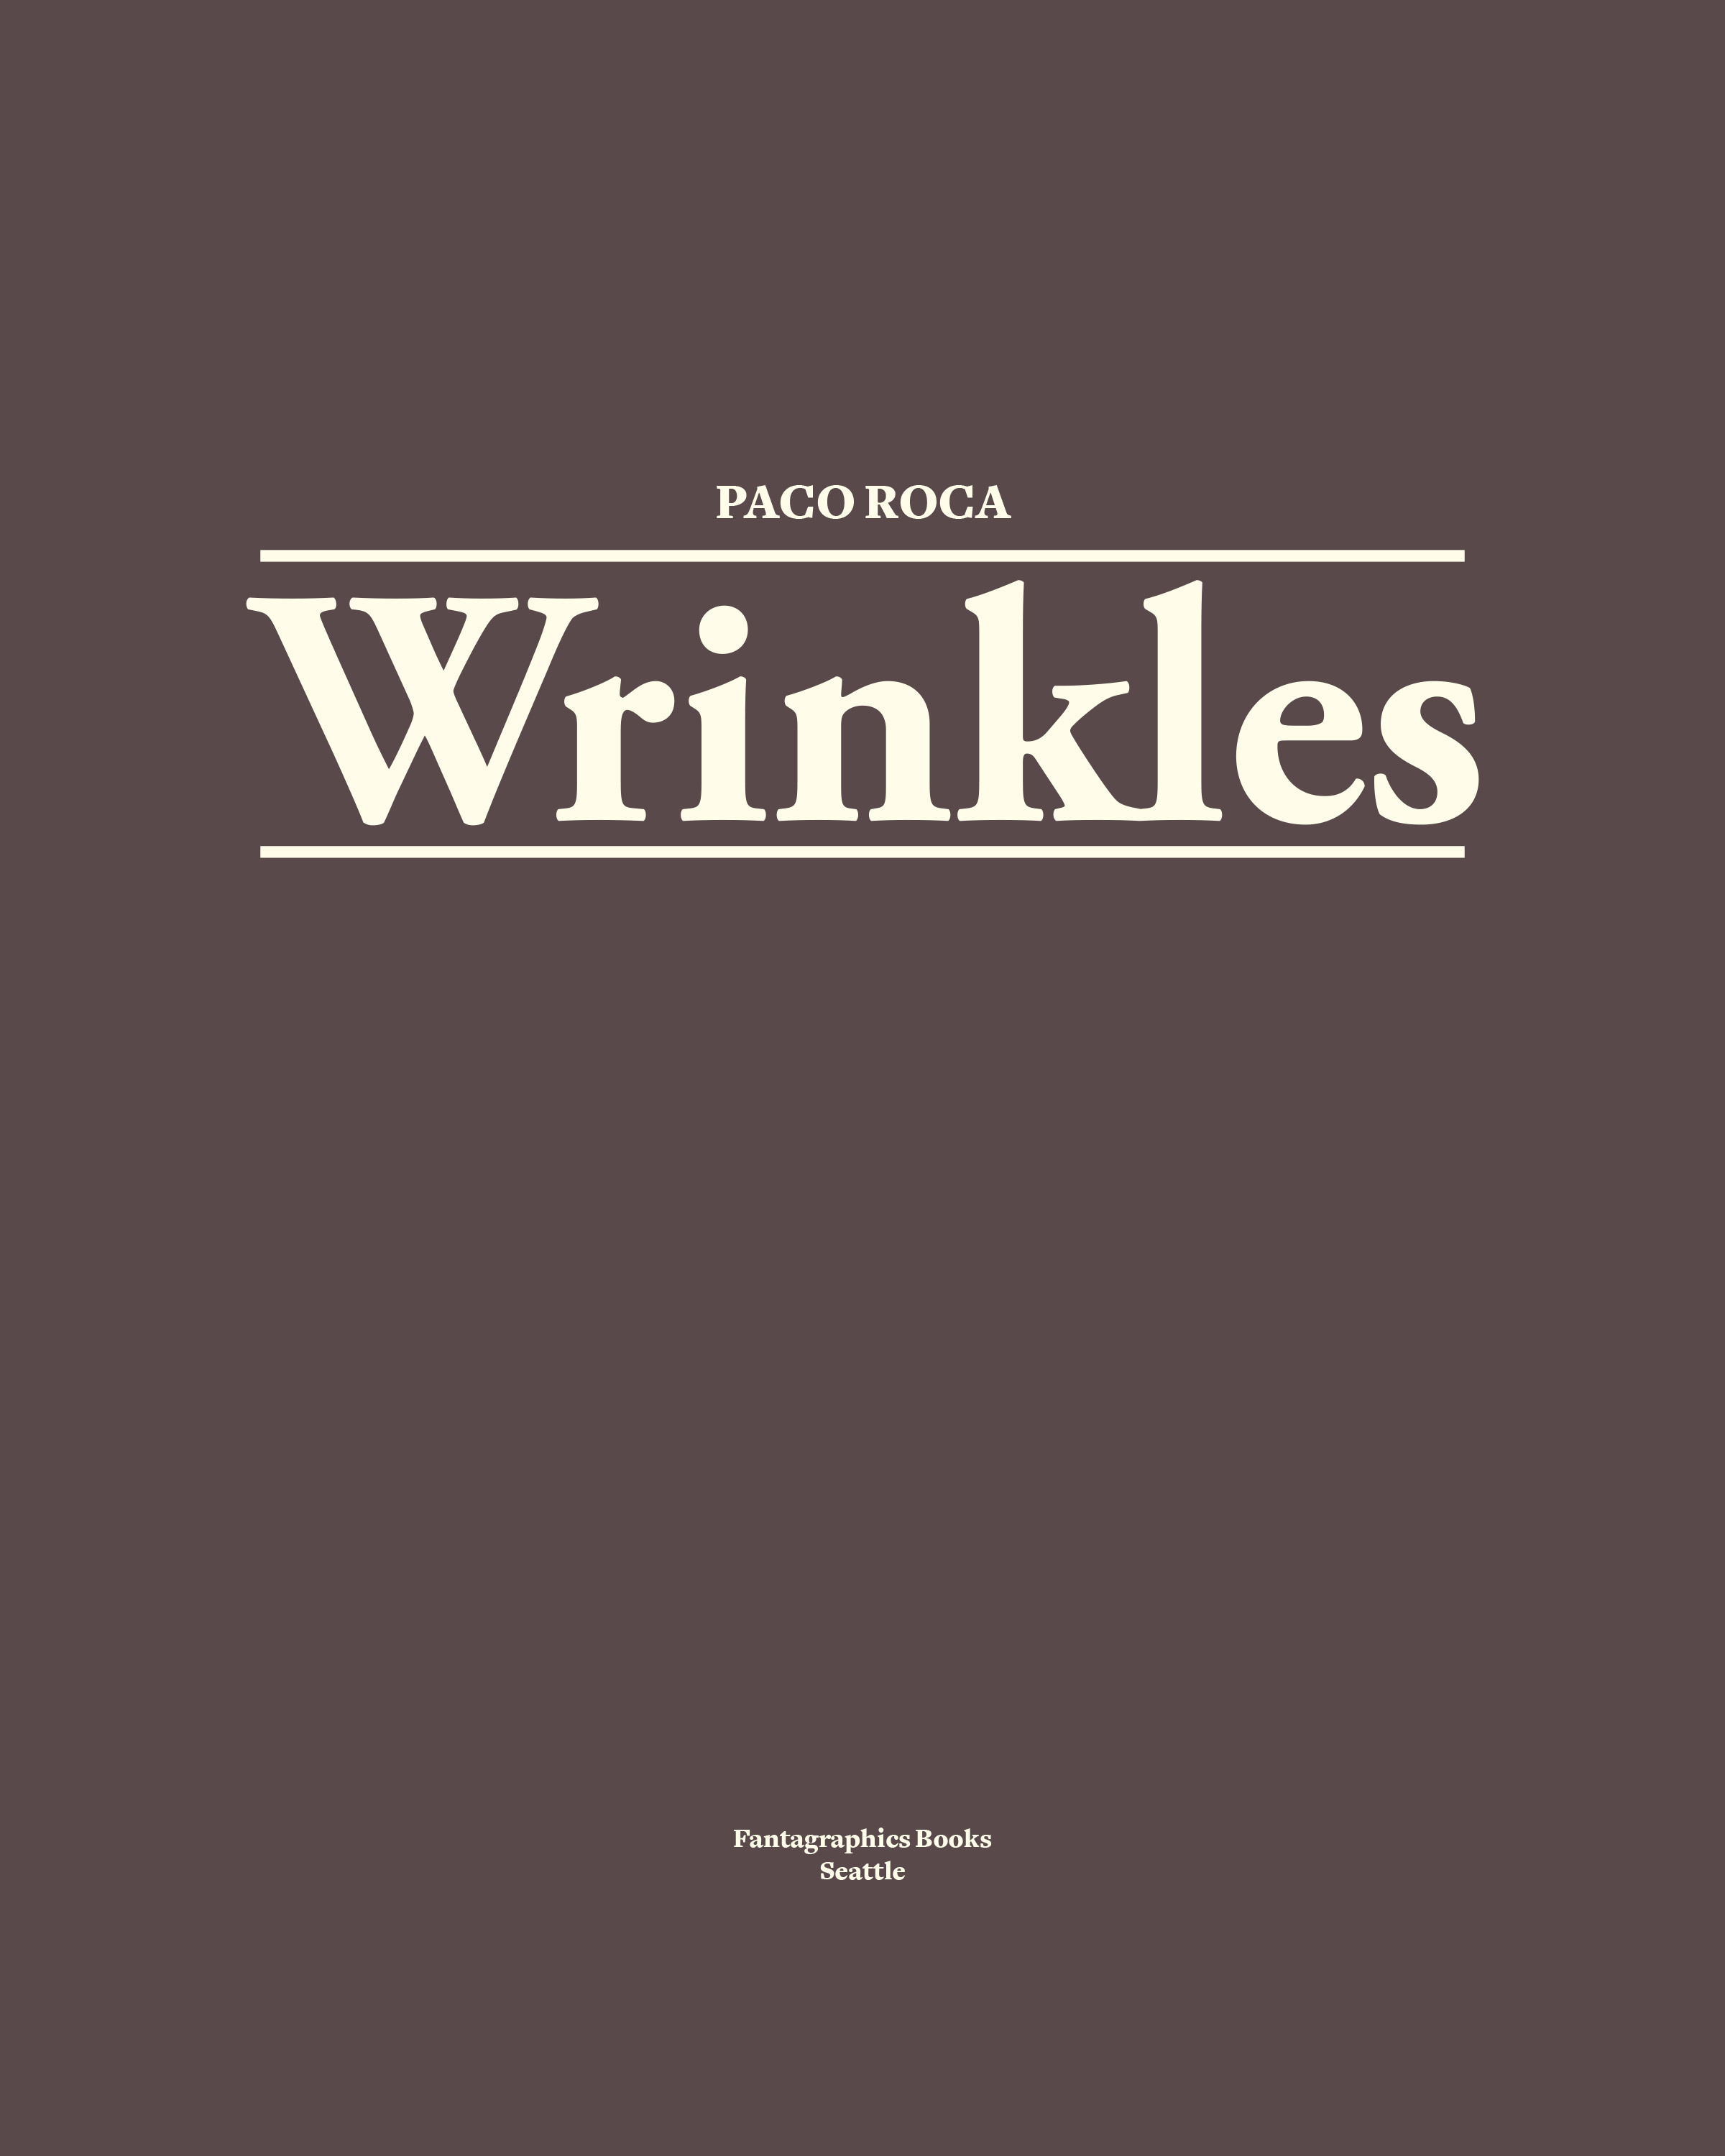 Read online Wrinkles comic -  Issue # TPB - 4